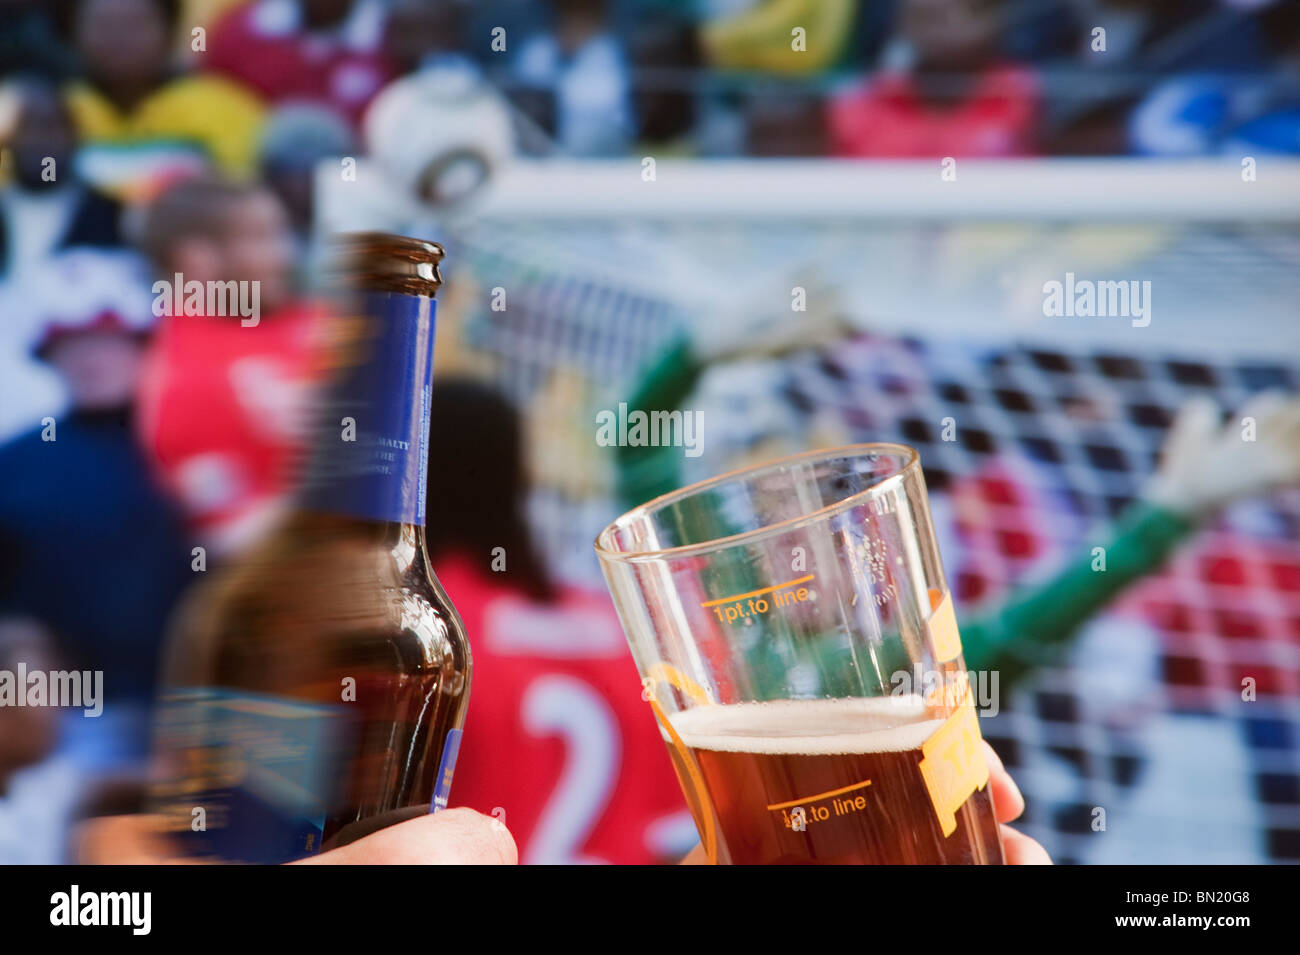 Watching world cup football match on pub tv screen with bottle of beer and glass of beer in foreground Stock Photo